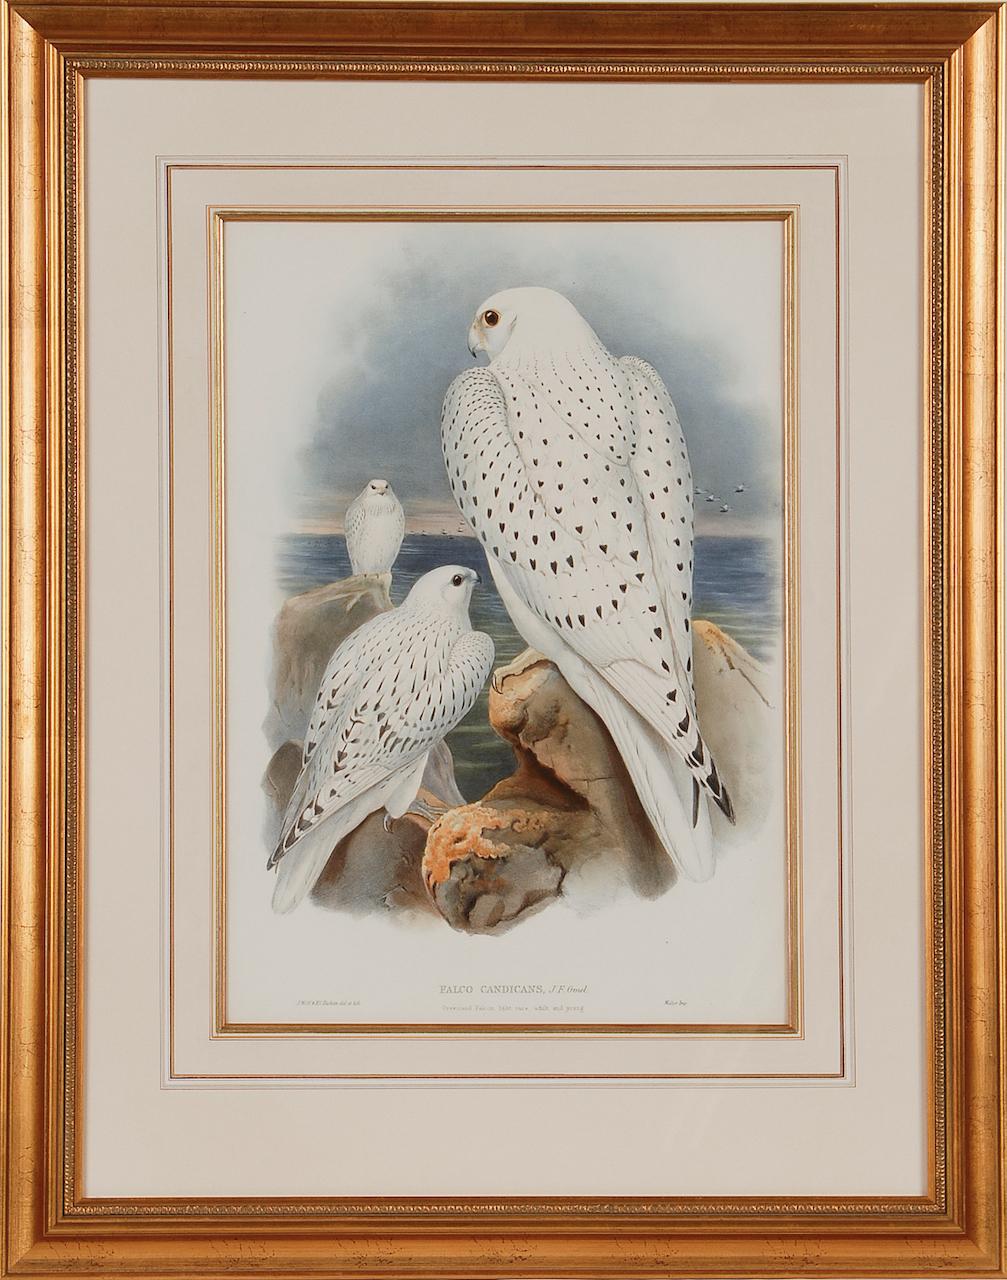 John Gould and Henry Constantine Richter Animal Print - Greenland Falcon "Falco Candicans": A 19th C. Hand-colored Lithograph by Gould